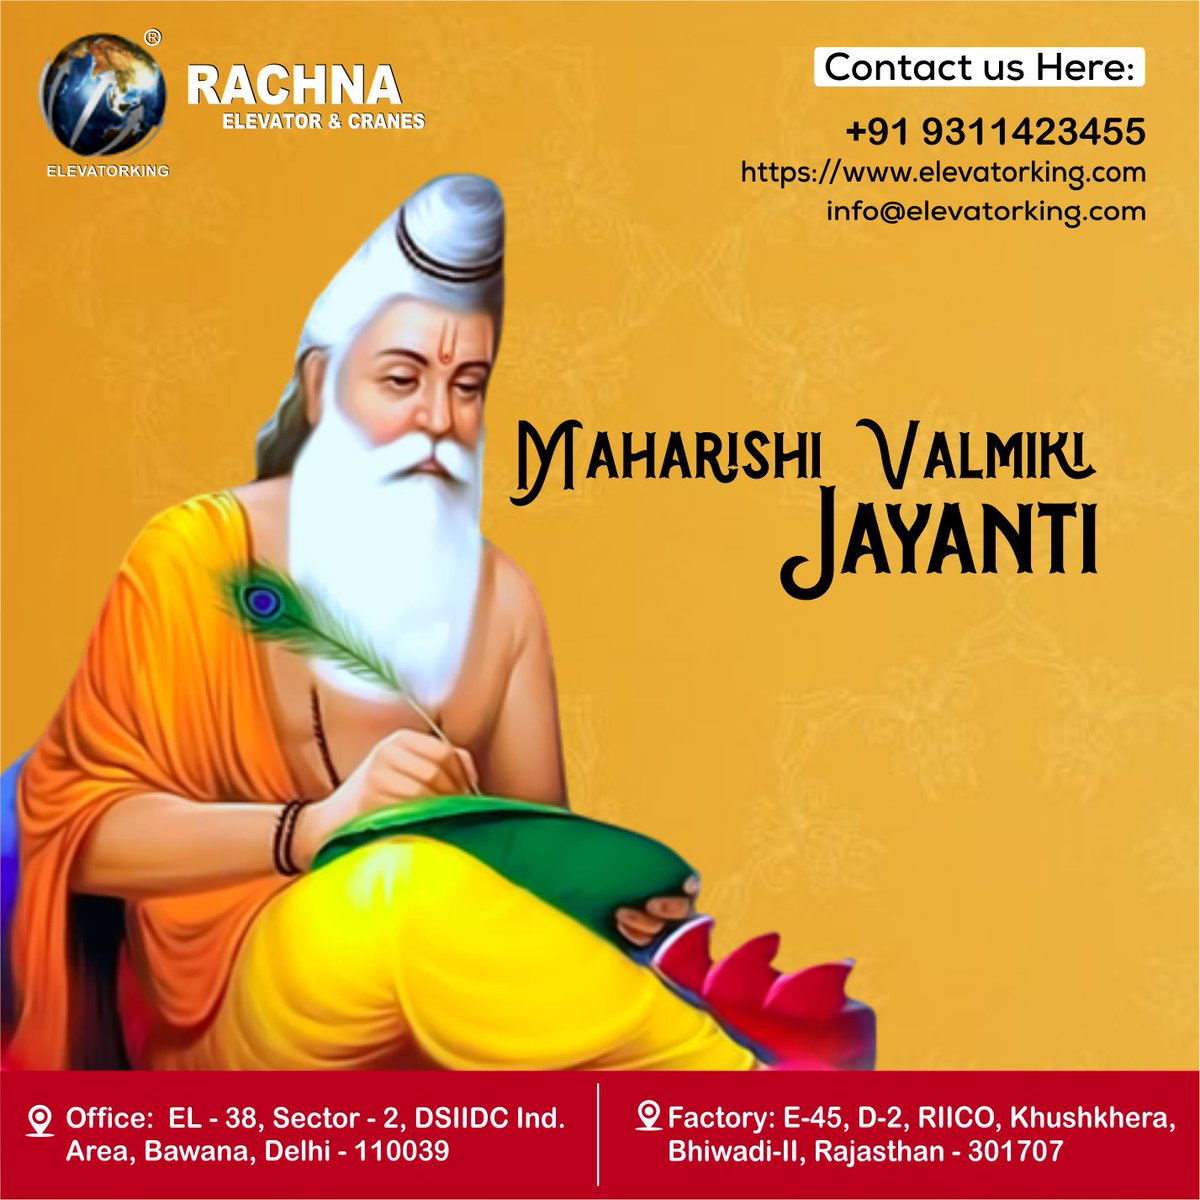 Happy Maharishi Valmiki Jayanti! Let's honor the great sage whose words in the Ramayana have enriched our lives with values, and timeless lessons. 
contact us here !
Email - info@elevatorking.com
Contact no. : 9311423455
#VirtueAndWisdom
#SageOfEnlightenment
#RamayanaTeachings